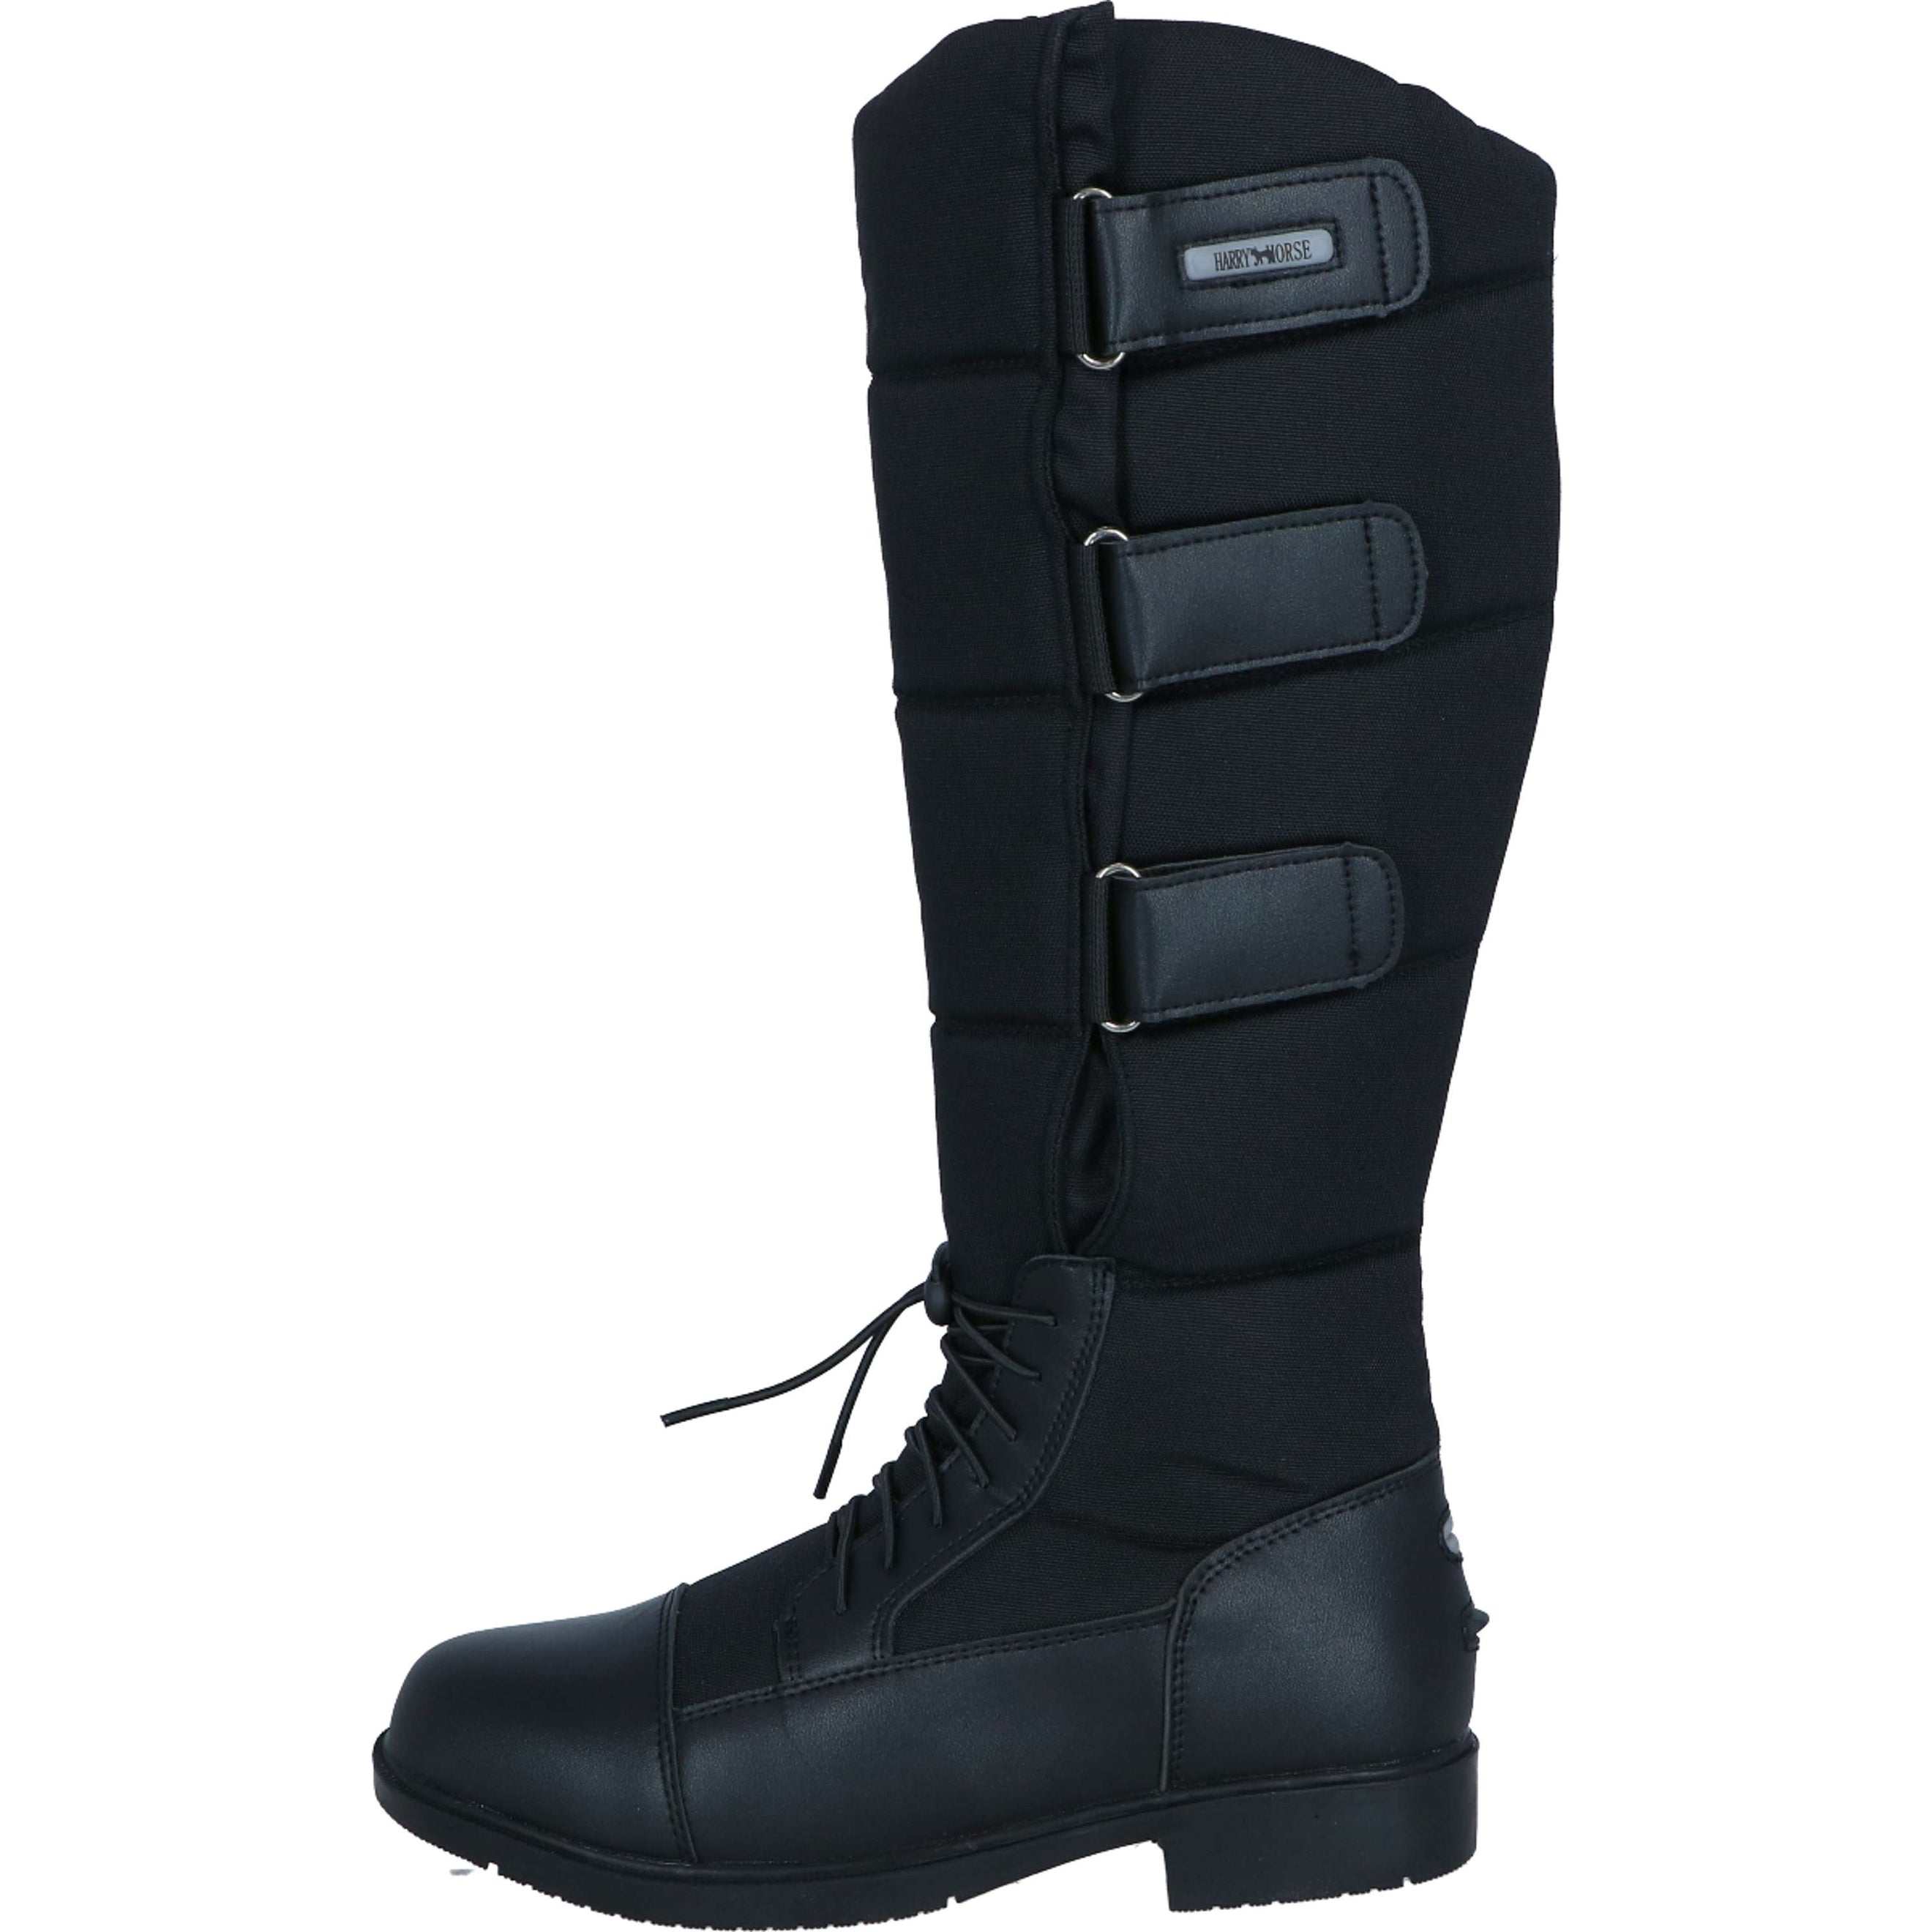 Harry's Horse Bottes Thermique Thermo-Rider Noir